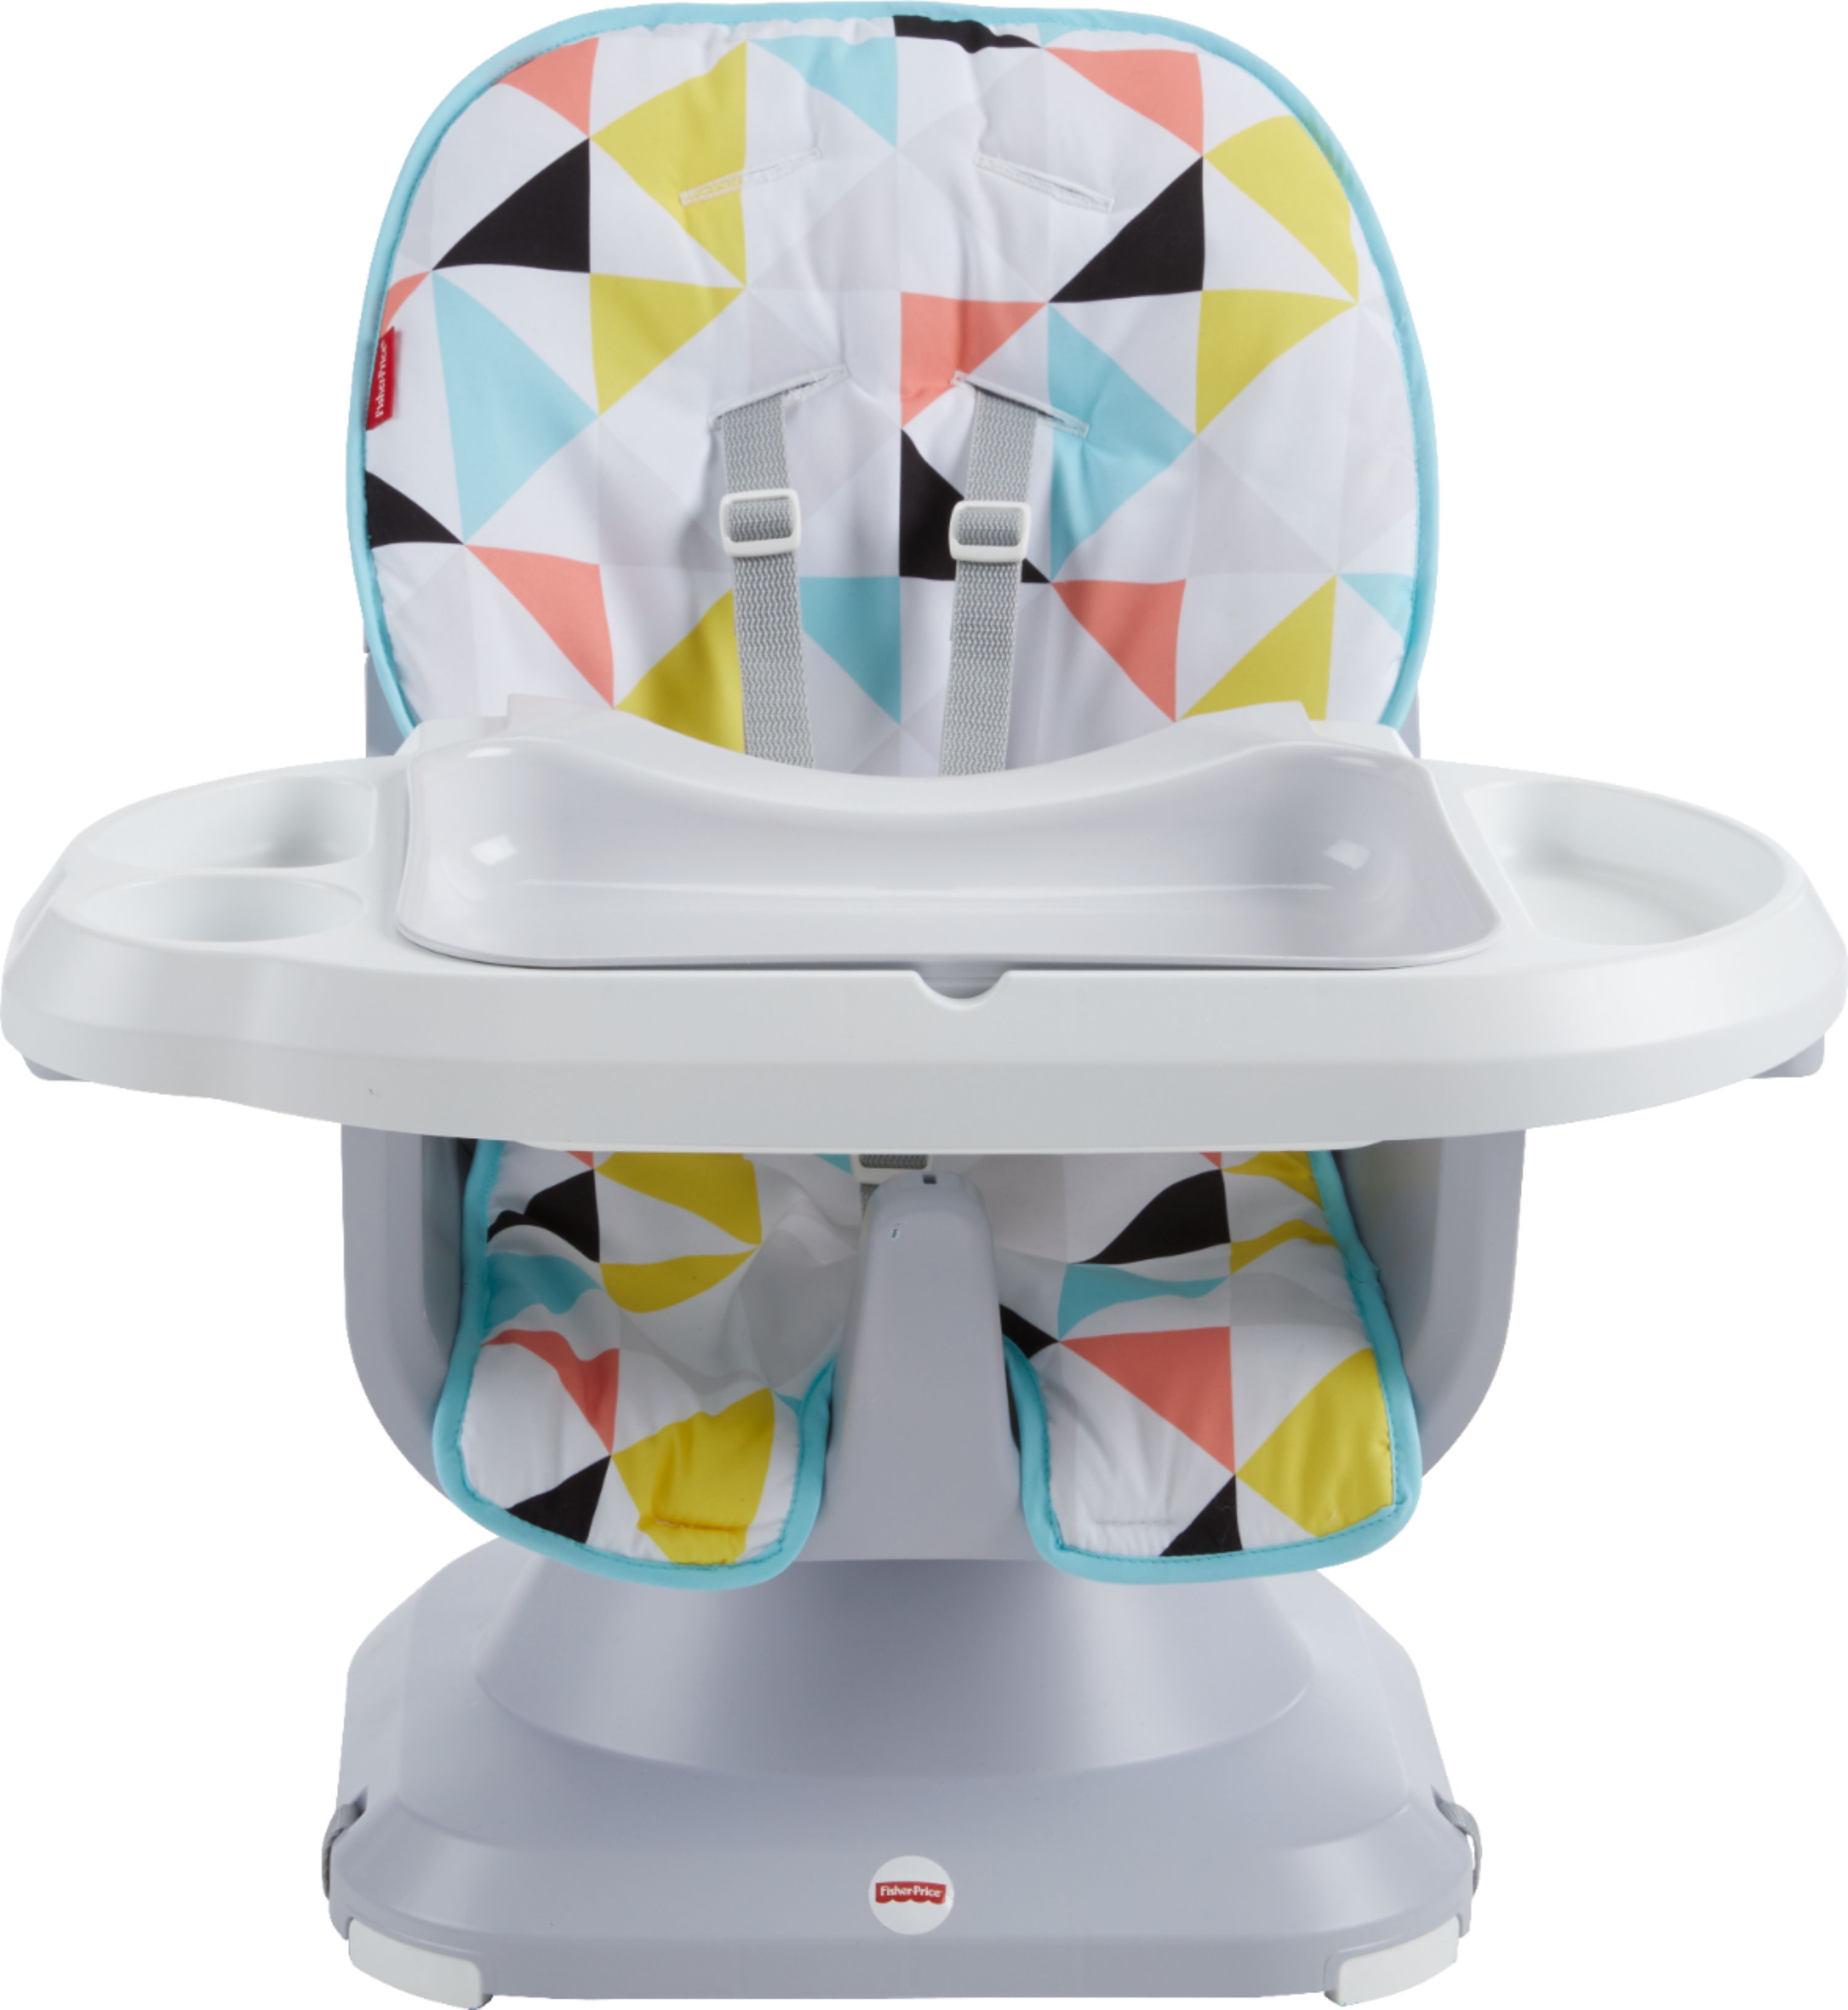 fisher price high chair price